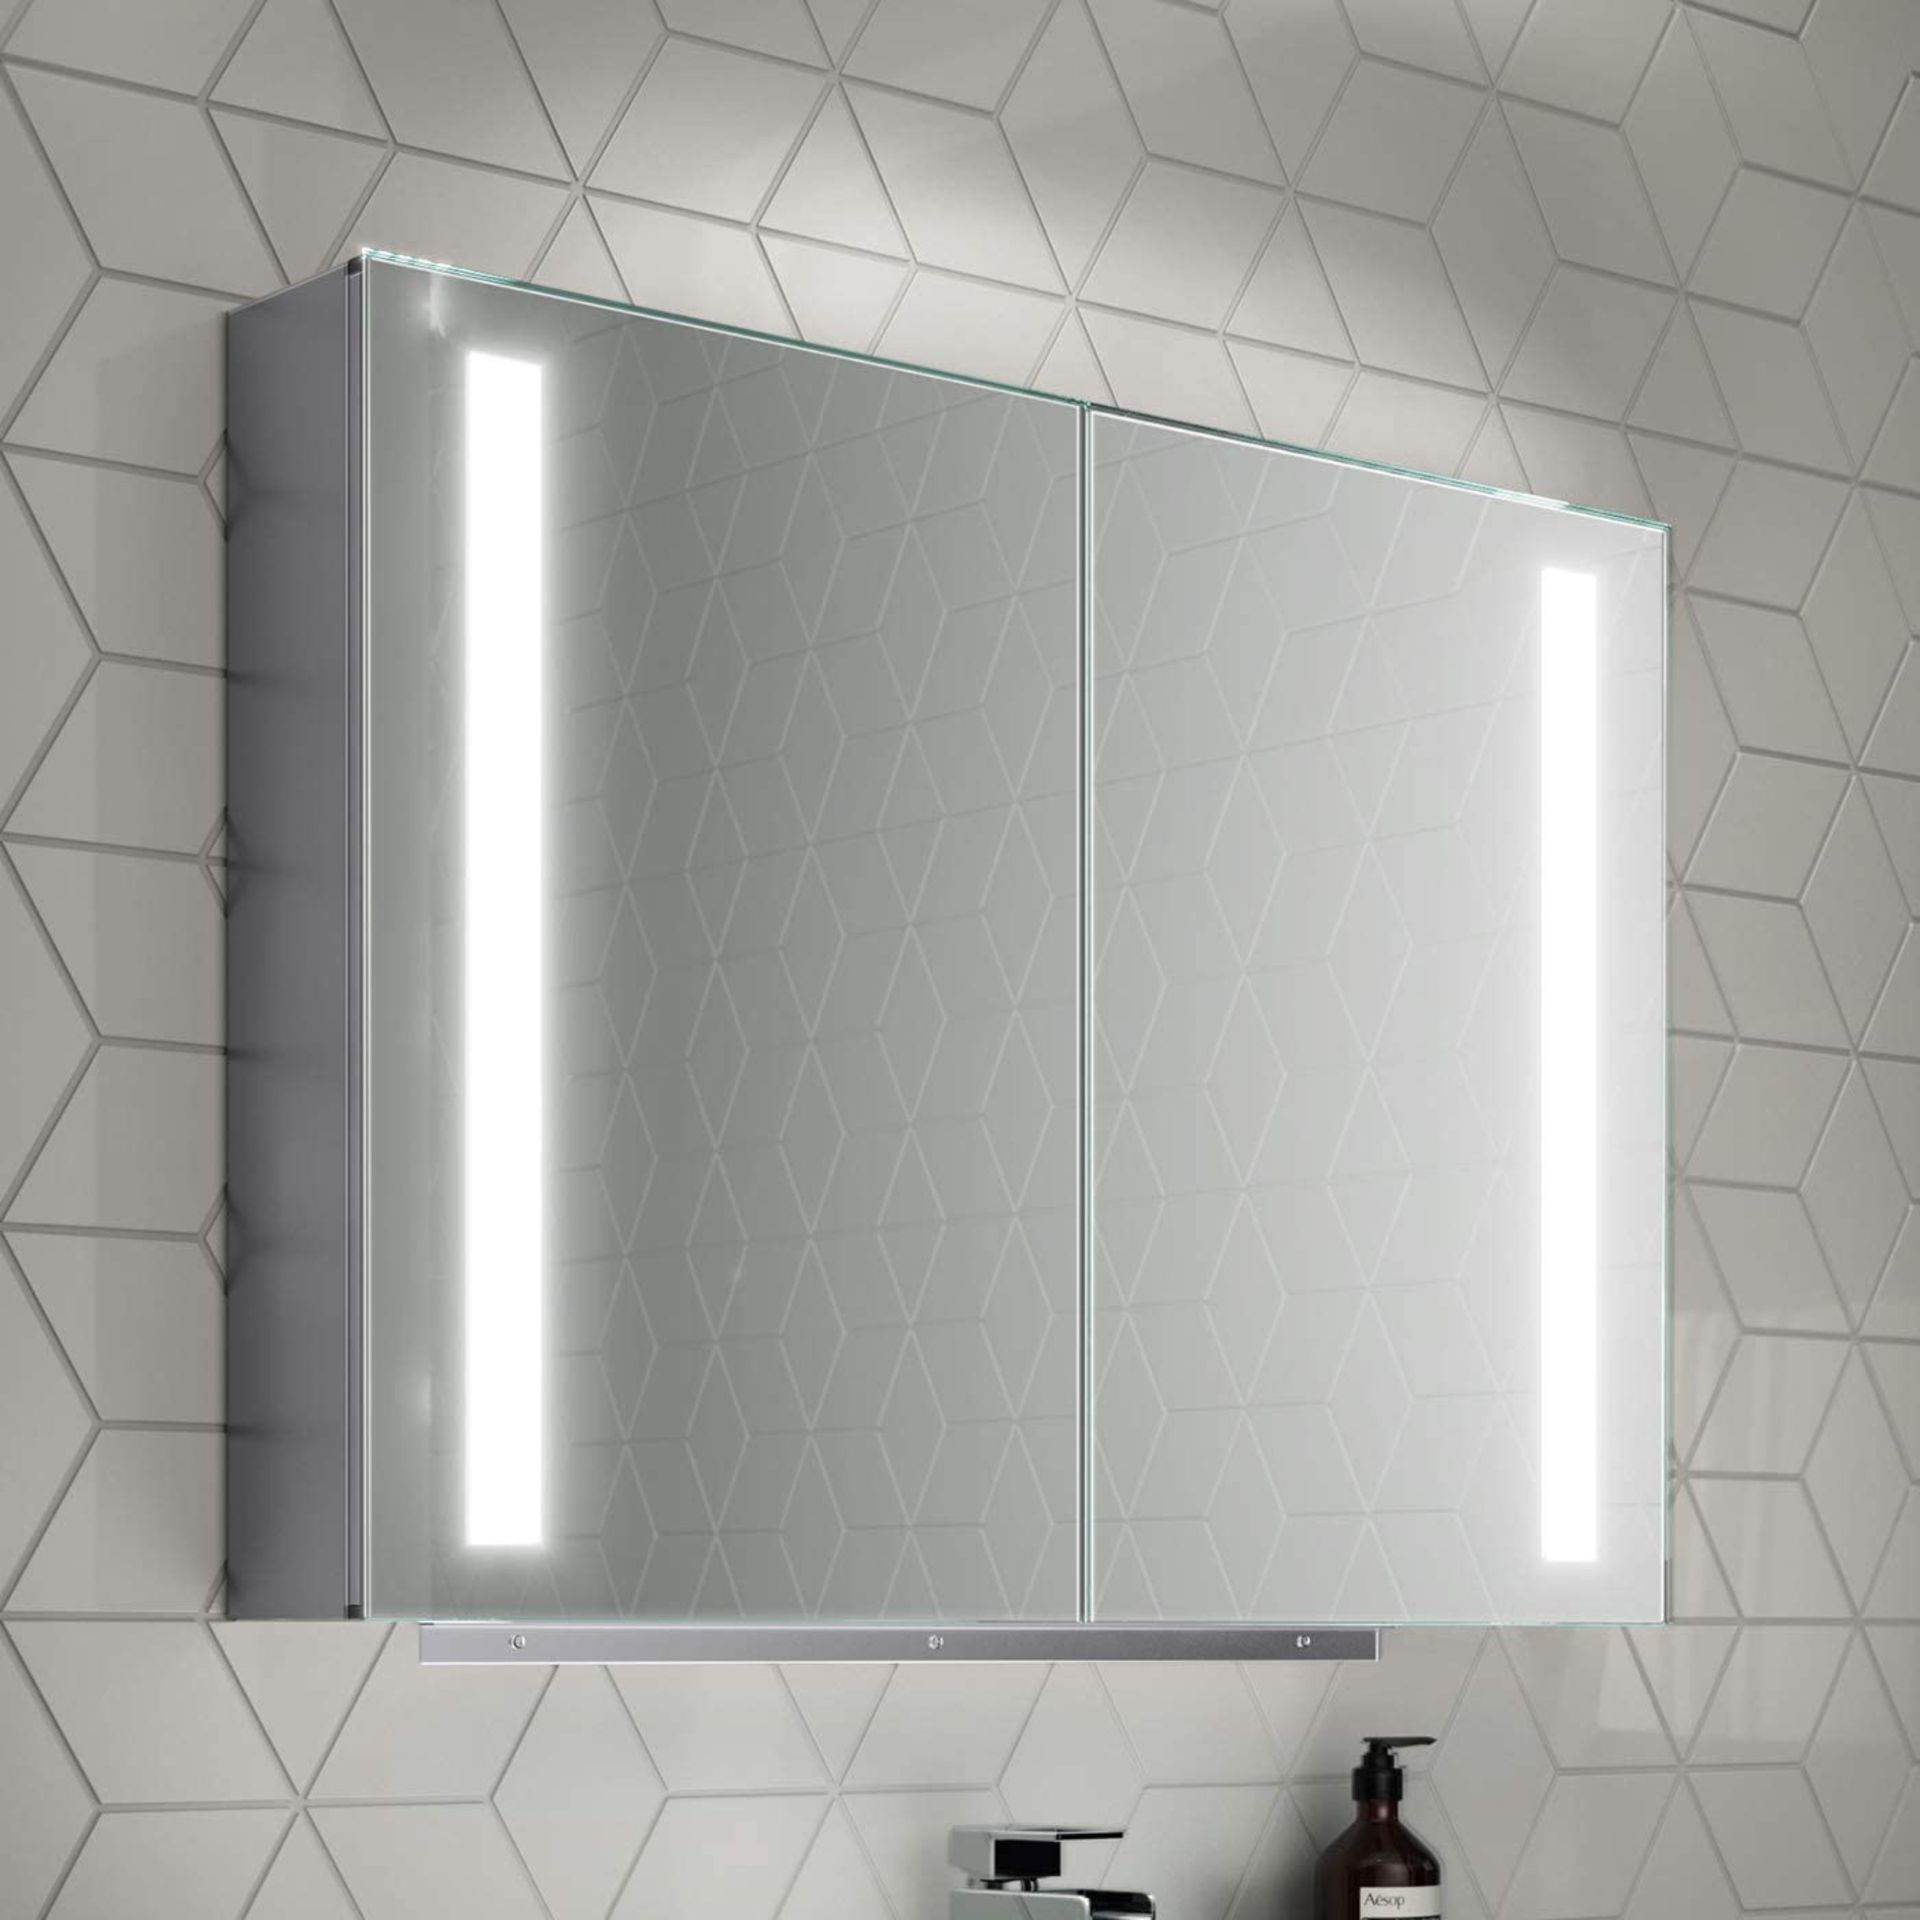 NEW 800x600 Dawn Illuminated LED Mirror Cabinet. RRP £939.99.MC164.We love this mirror cabinet as it